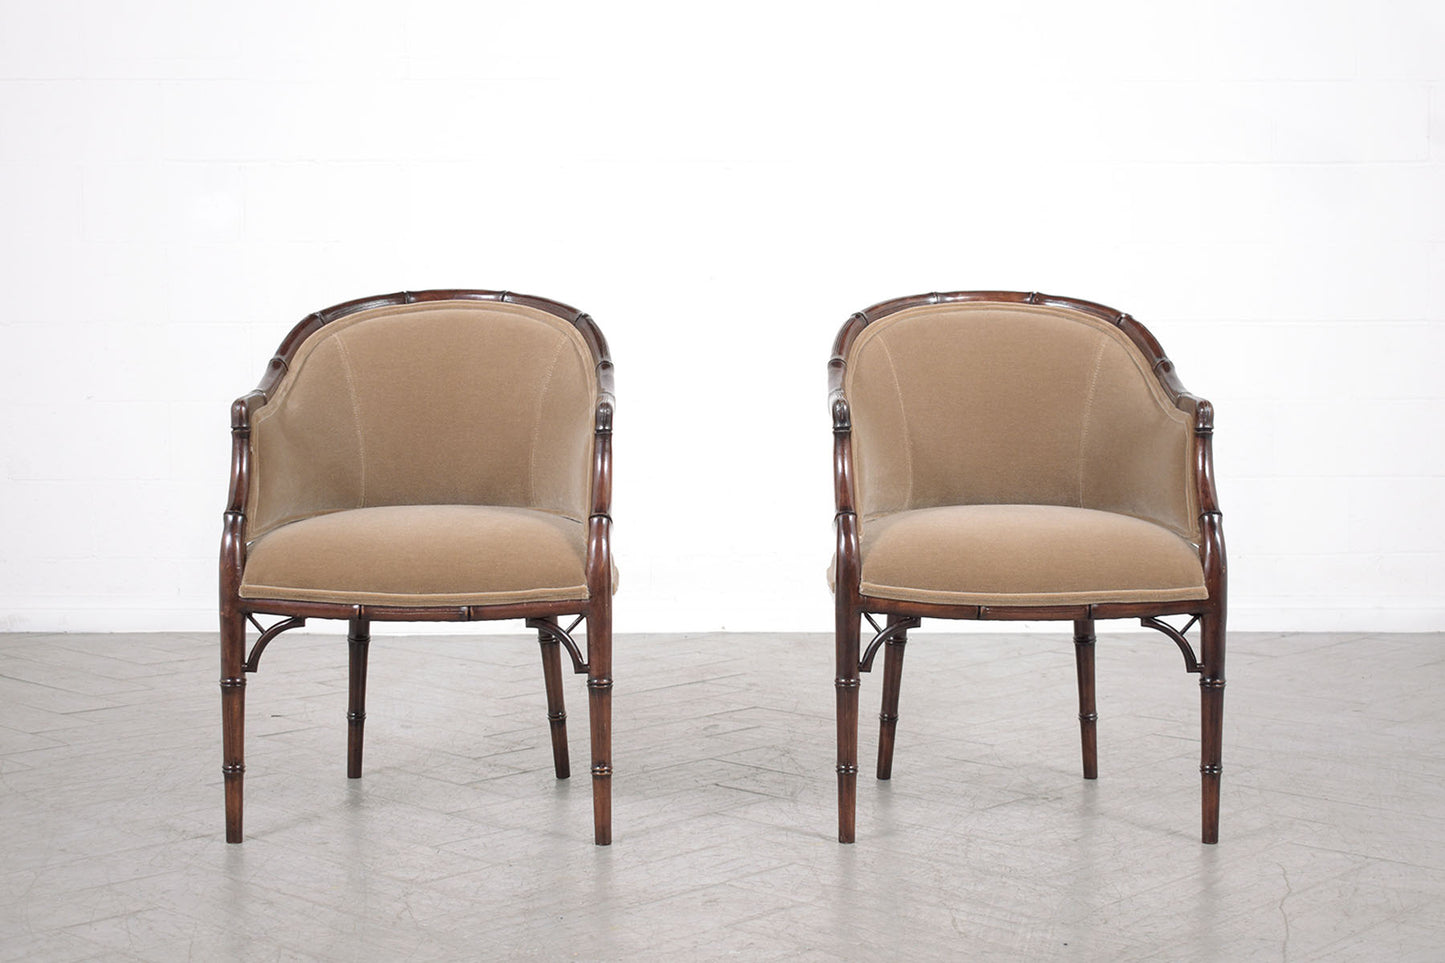 Elegant Vintage Hollywood Regency Armchairs: Bamboo-Carved and Newly Refurbished